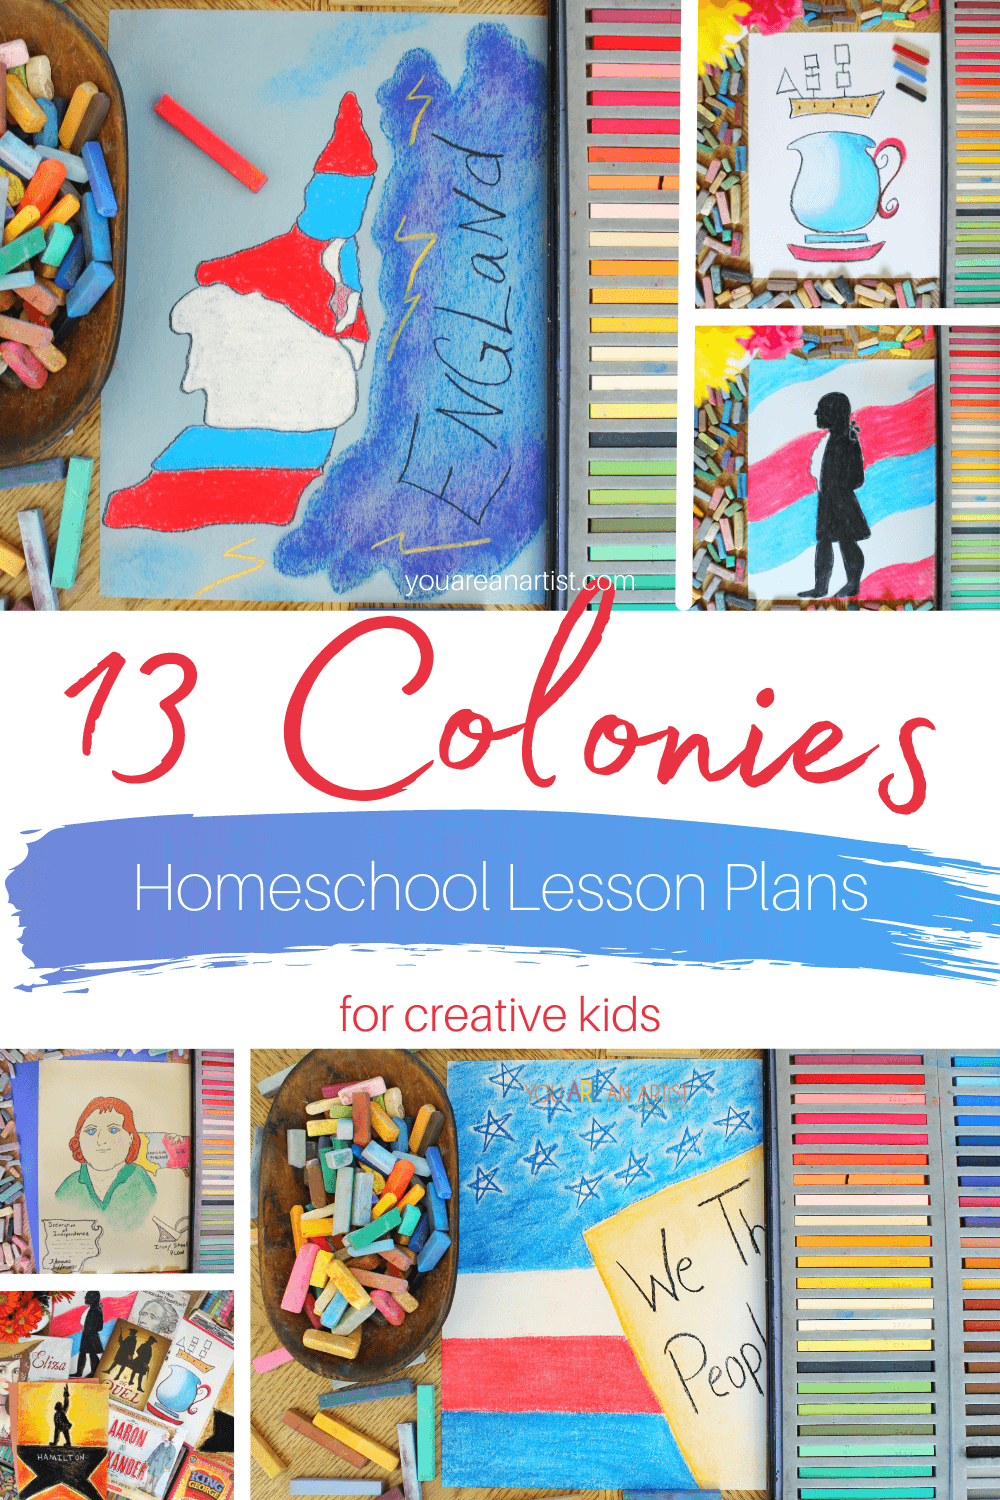 13 Colonies Lesson Plans For Creative Kids: Are your students learning about the 13 Colonies? Why not add Nana's wonderful chalk pastels as a colorful and artistic project to help solidify their knowledge? All you need is a simple starter set of chalk pastels, a pack of construction paper, and Nana's video art lessons! #YouAREAnArtist #ThirteenColonies #13Colonies #AmericanHistory #chalkpastels #USHistory